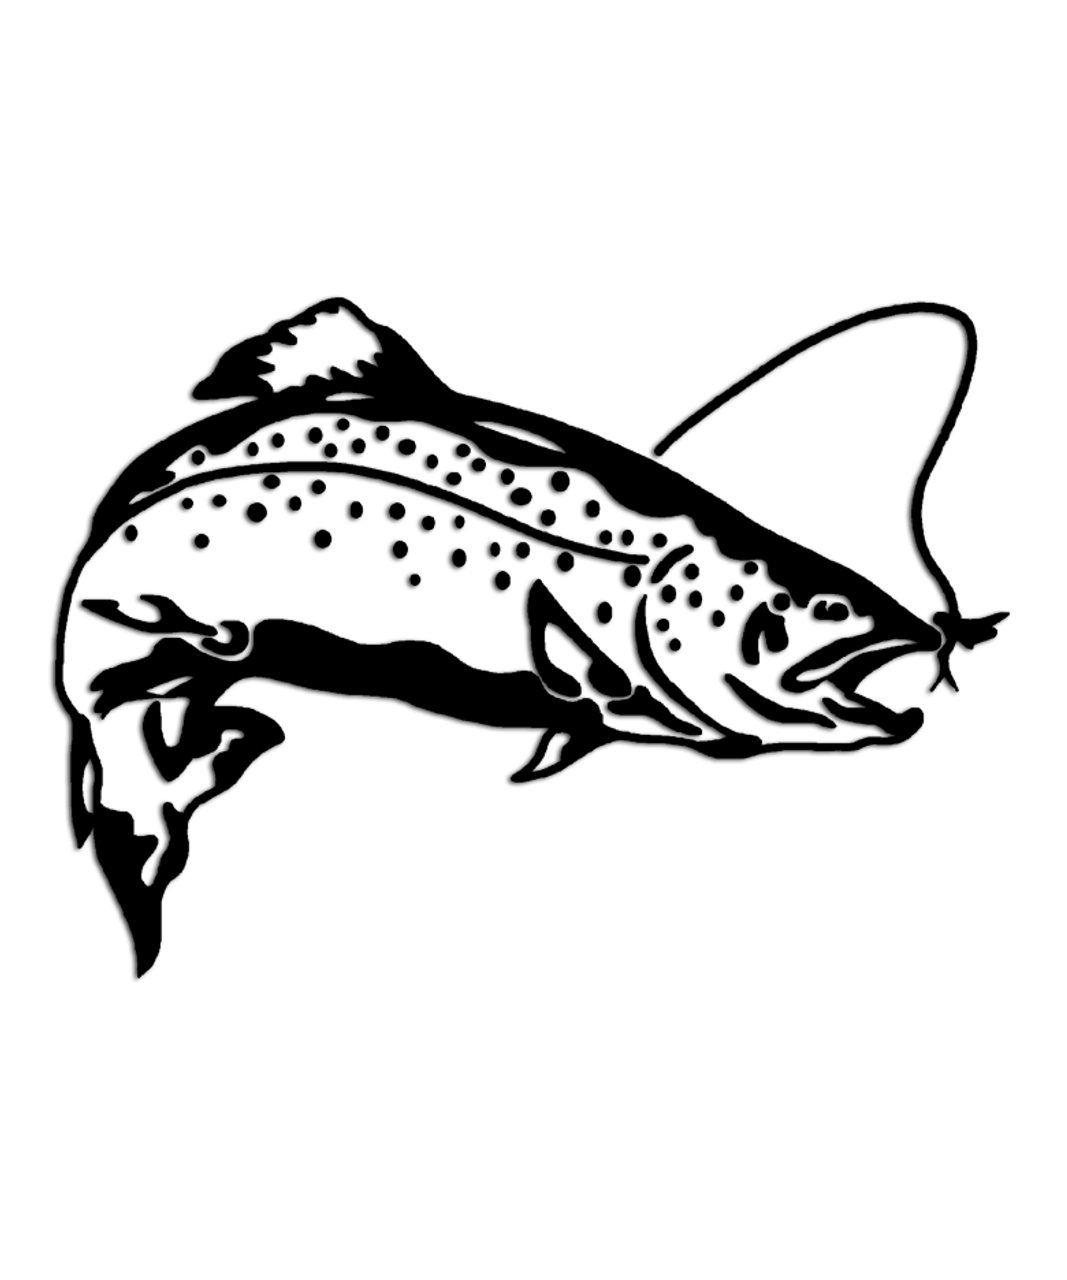 Download Rainbow Trout Fly Fishing Sticker - Aftershock Decals